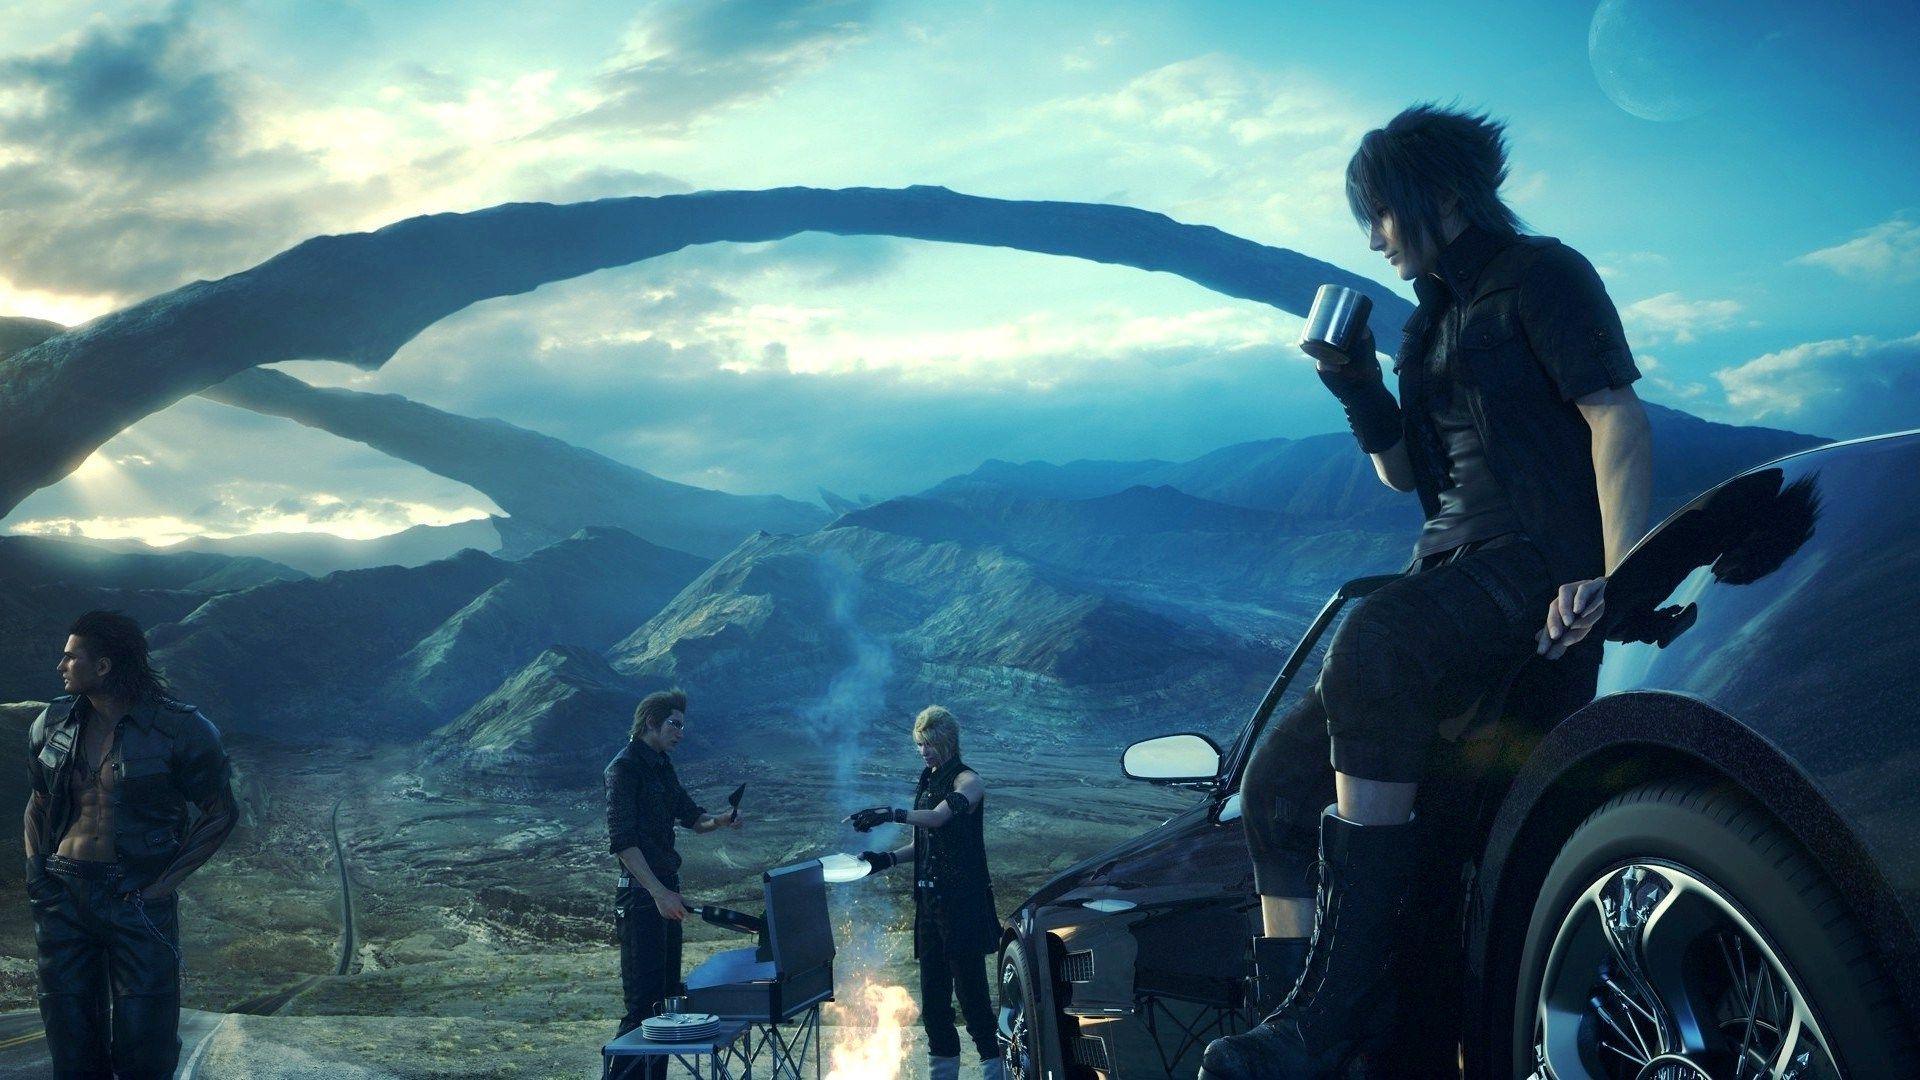 Final Fantasy XV Update 1.10 Adds Survey About DLC